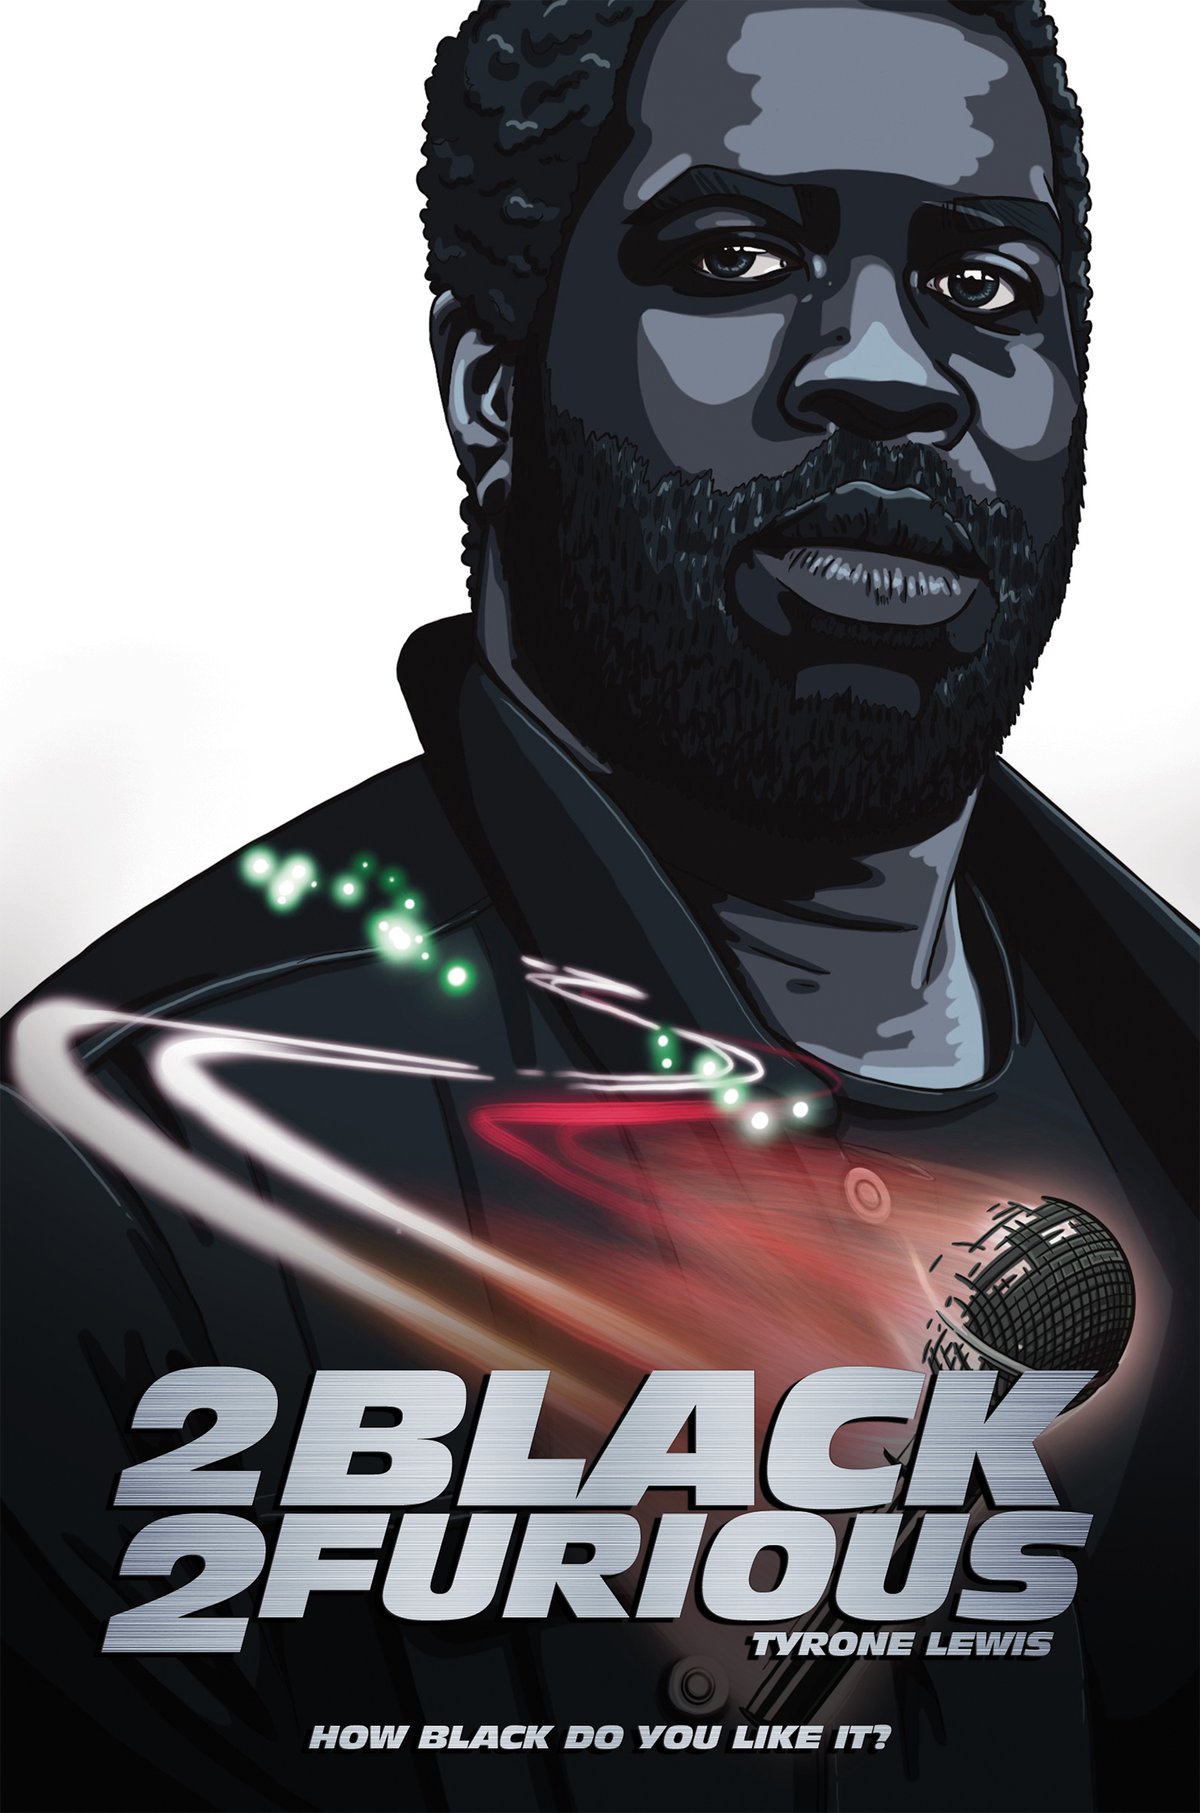 Image of 2 Black 2 Furious by Tyrone Lewis